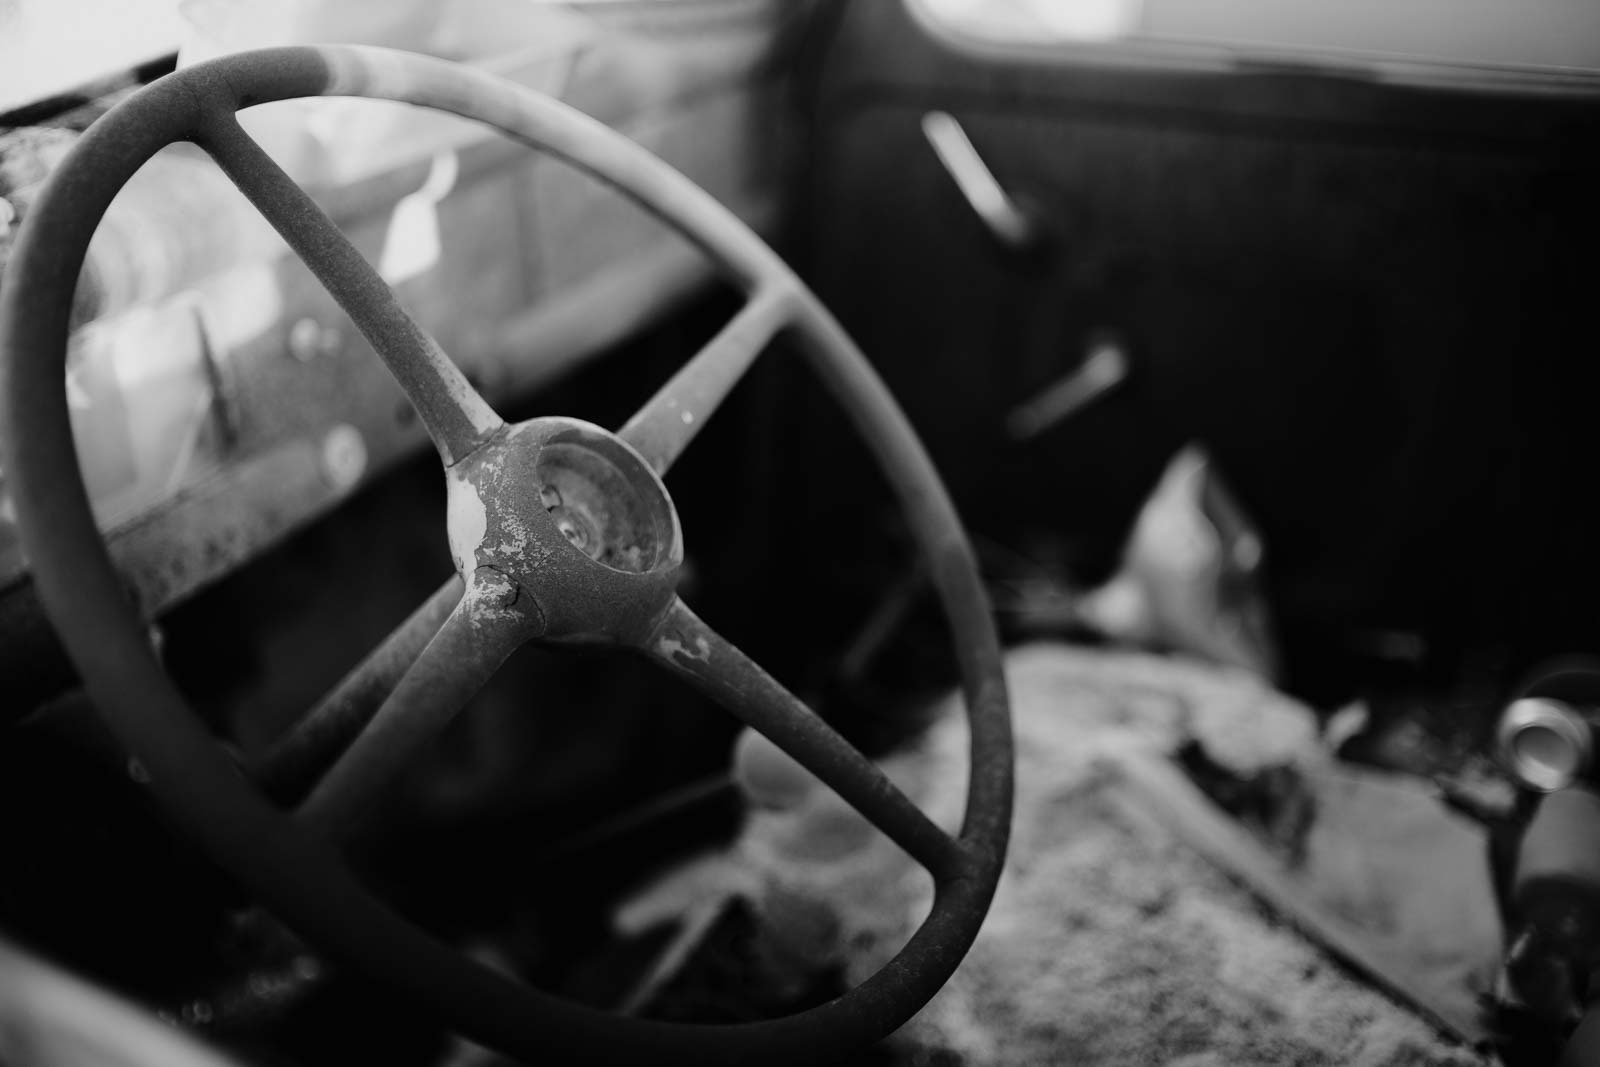 An rusty steering wheel found in Helotes, Texas. LM102297